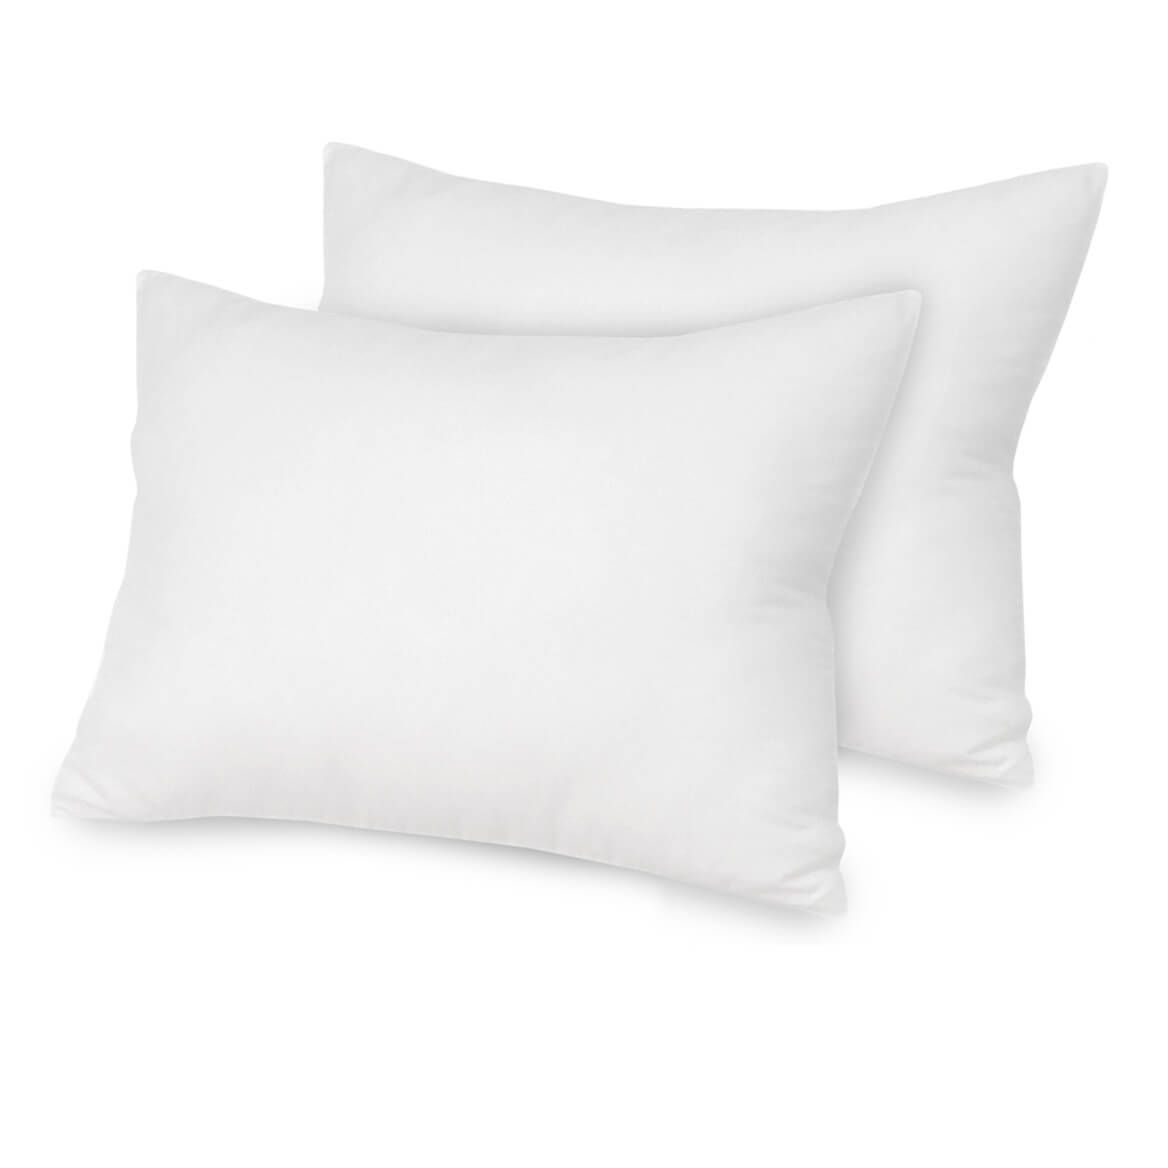 Ultra Fresh™ Antimicrobial Cotton Pillows - Set of 2 + '-' + 350080